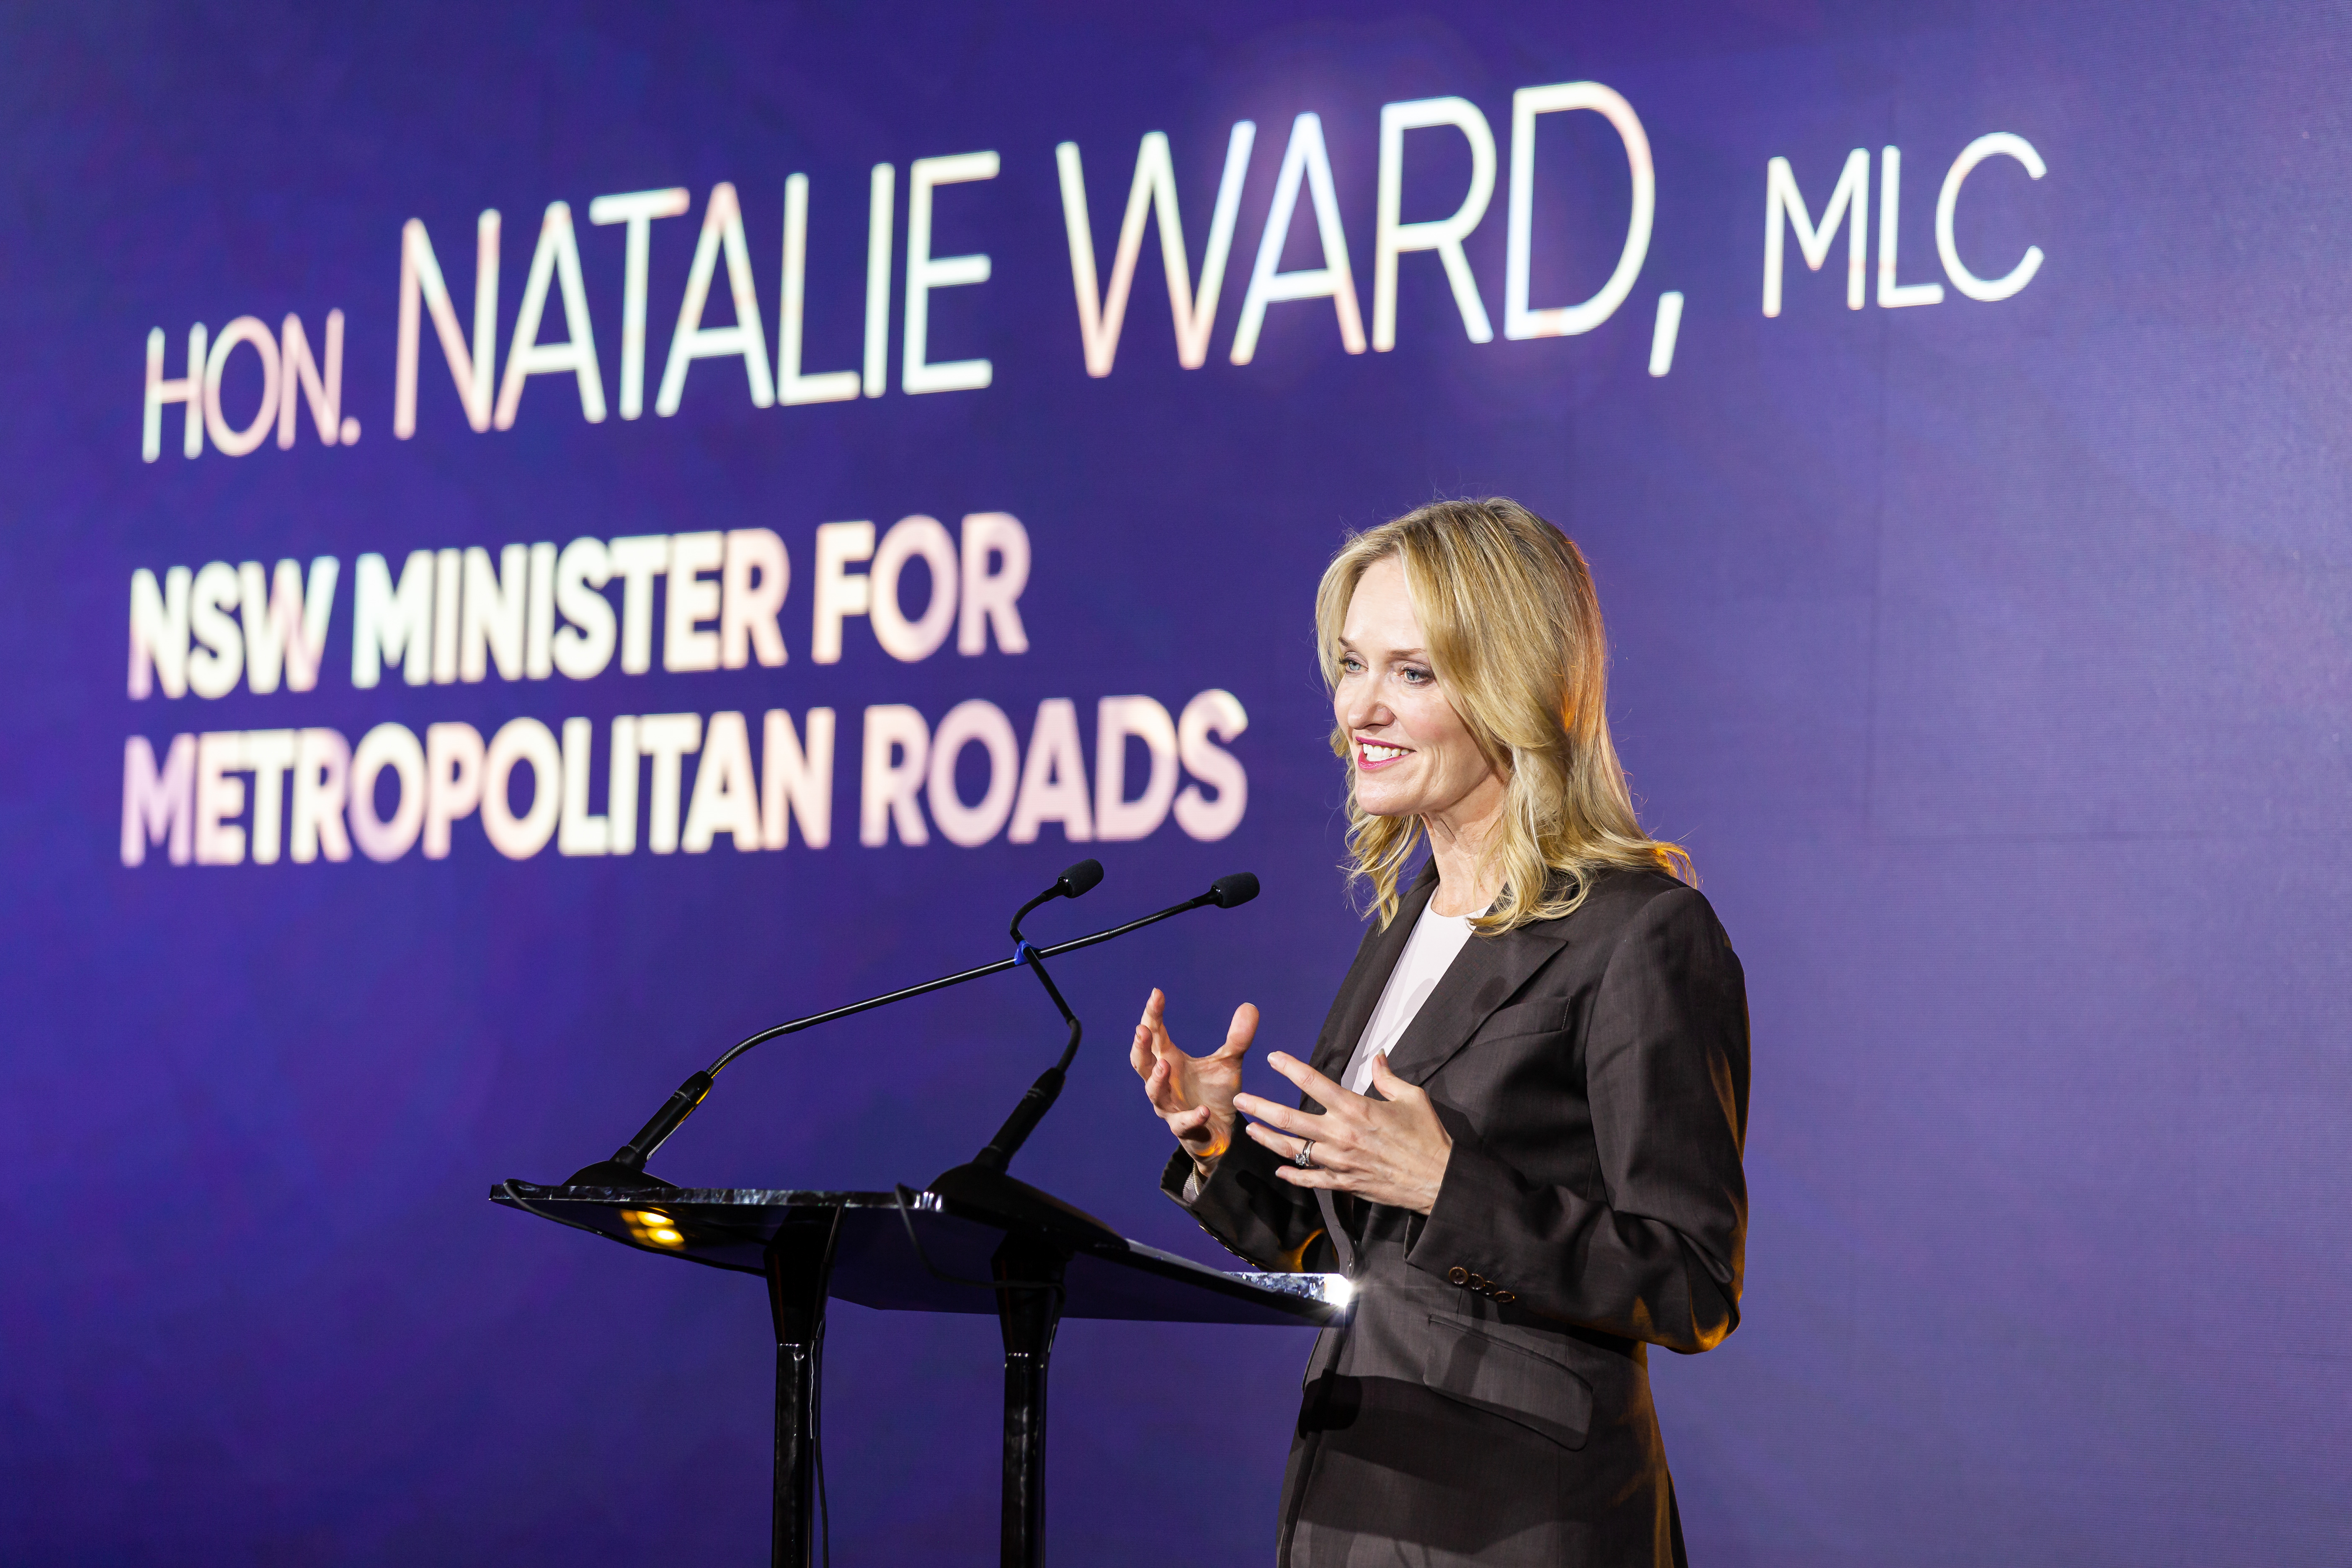 The Hon Natalie Ward, NSW Minister for Metropolitan Roads, gives the keynote address at the Awards Dinner.